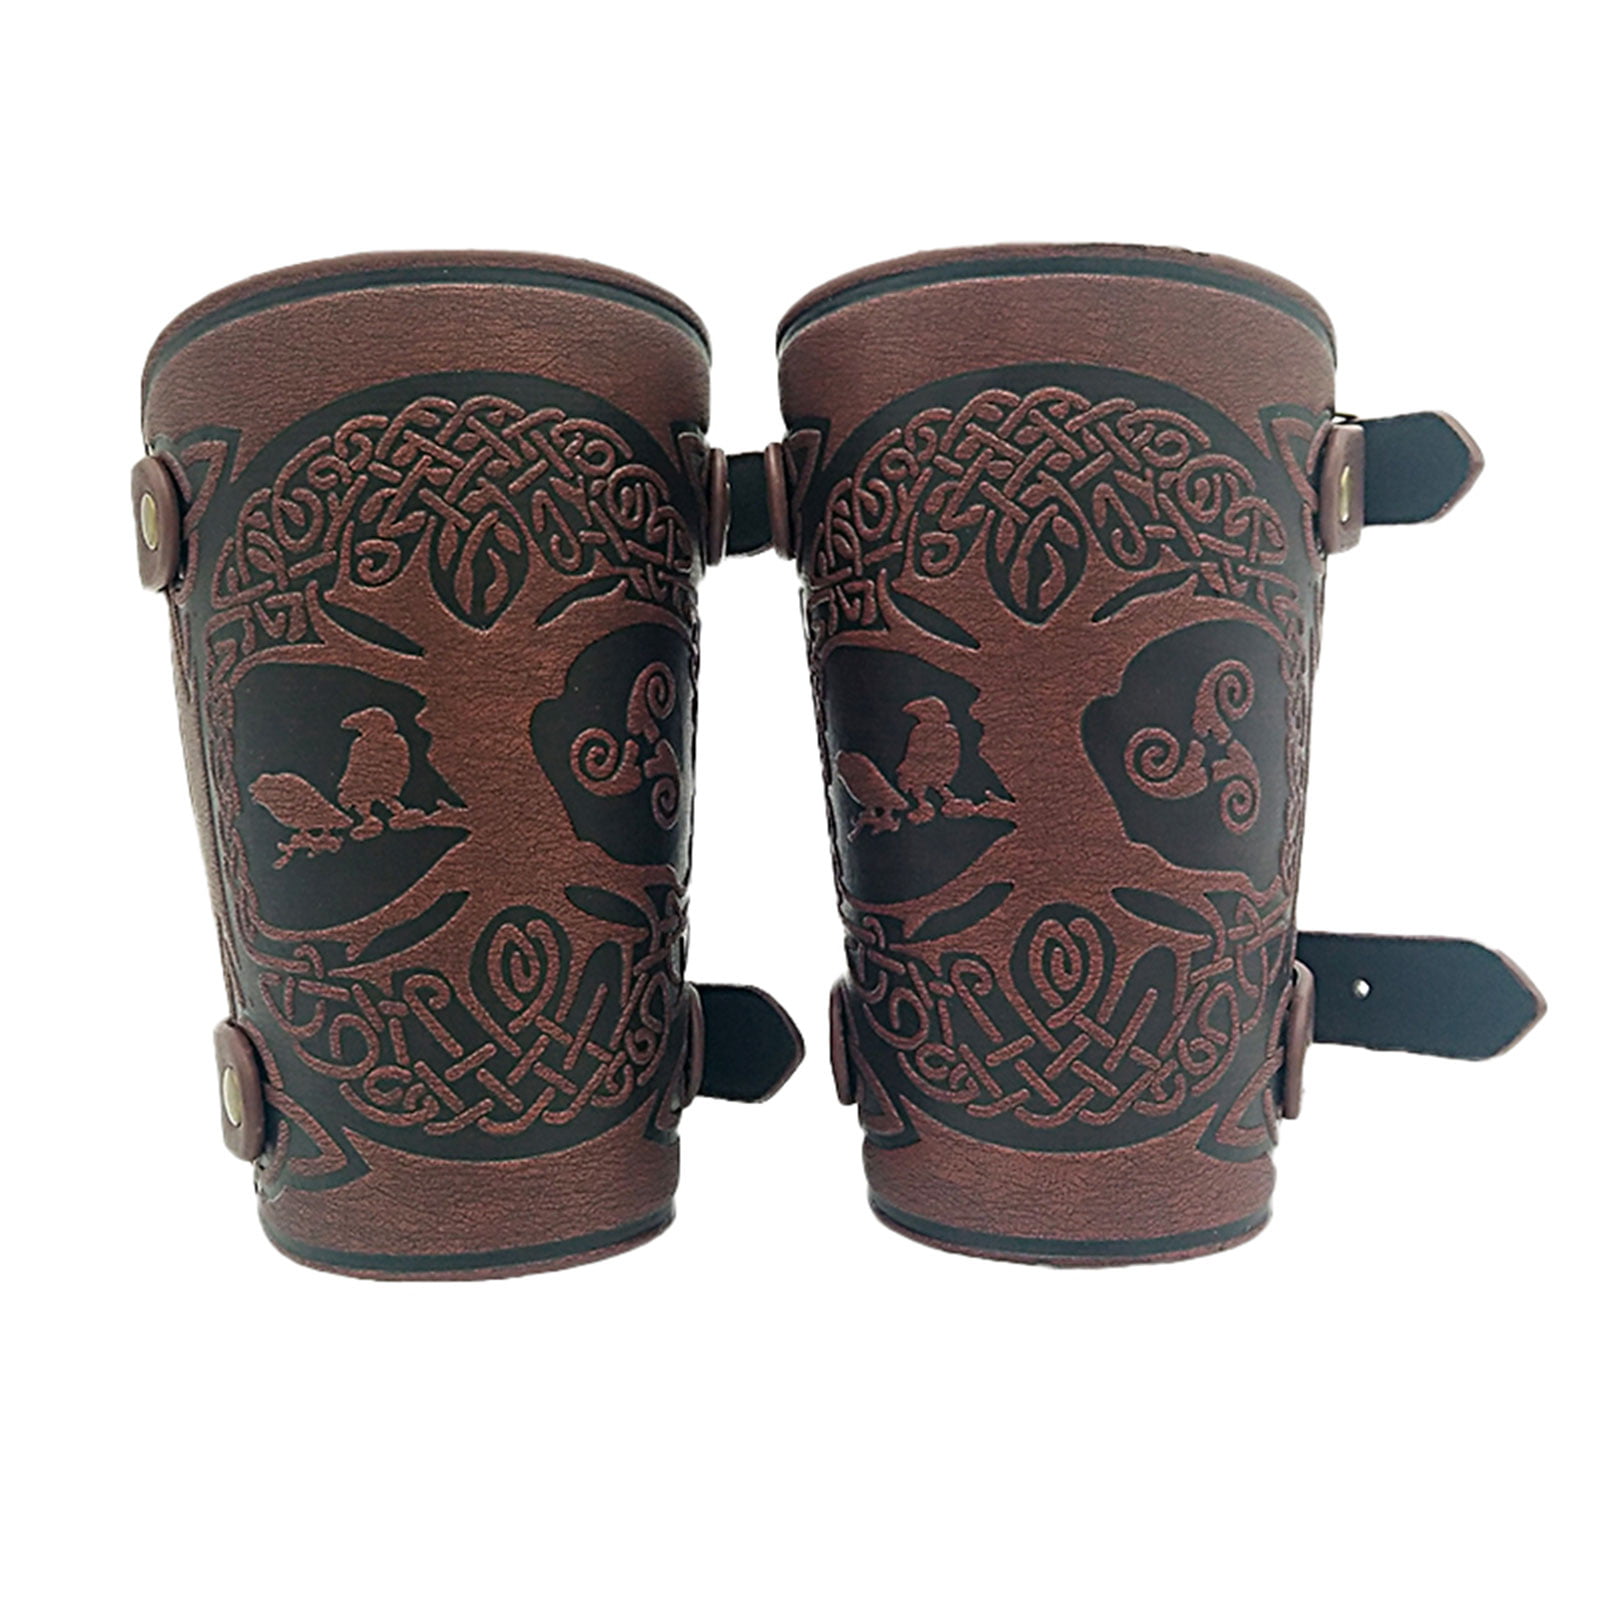 Details about   Adjustable Archery Arm Guard Cover Forearm Protect String Bow Portable 